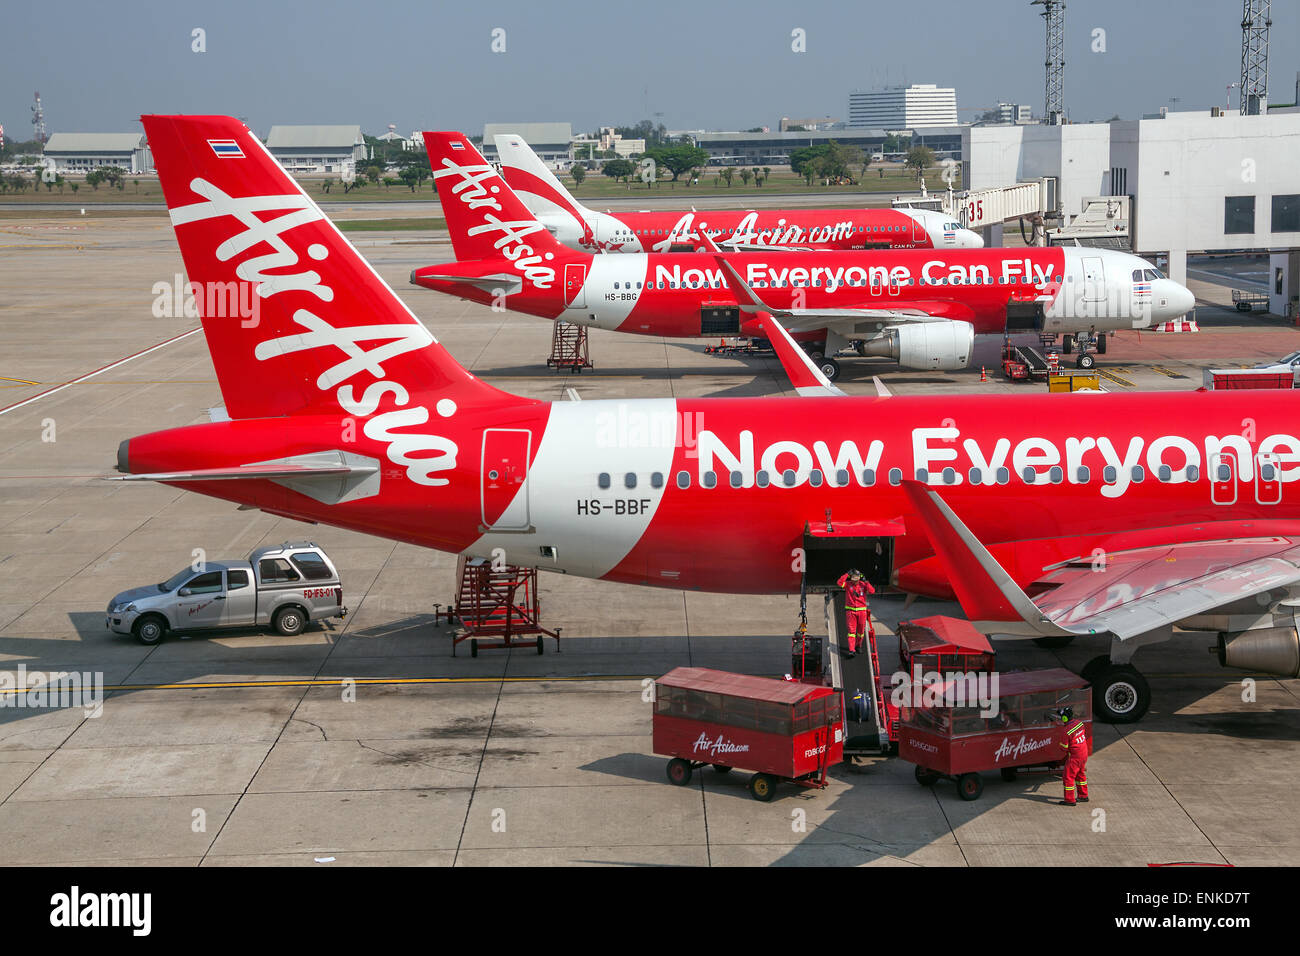 BANGKOK, THAILAND - MARCH 8, 2014: unloading of baggage from the Air Asia aircraft in Bangkok airport on March 8, 2014. Stock Photo